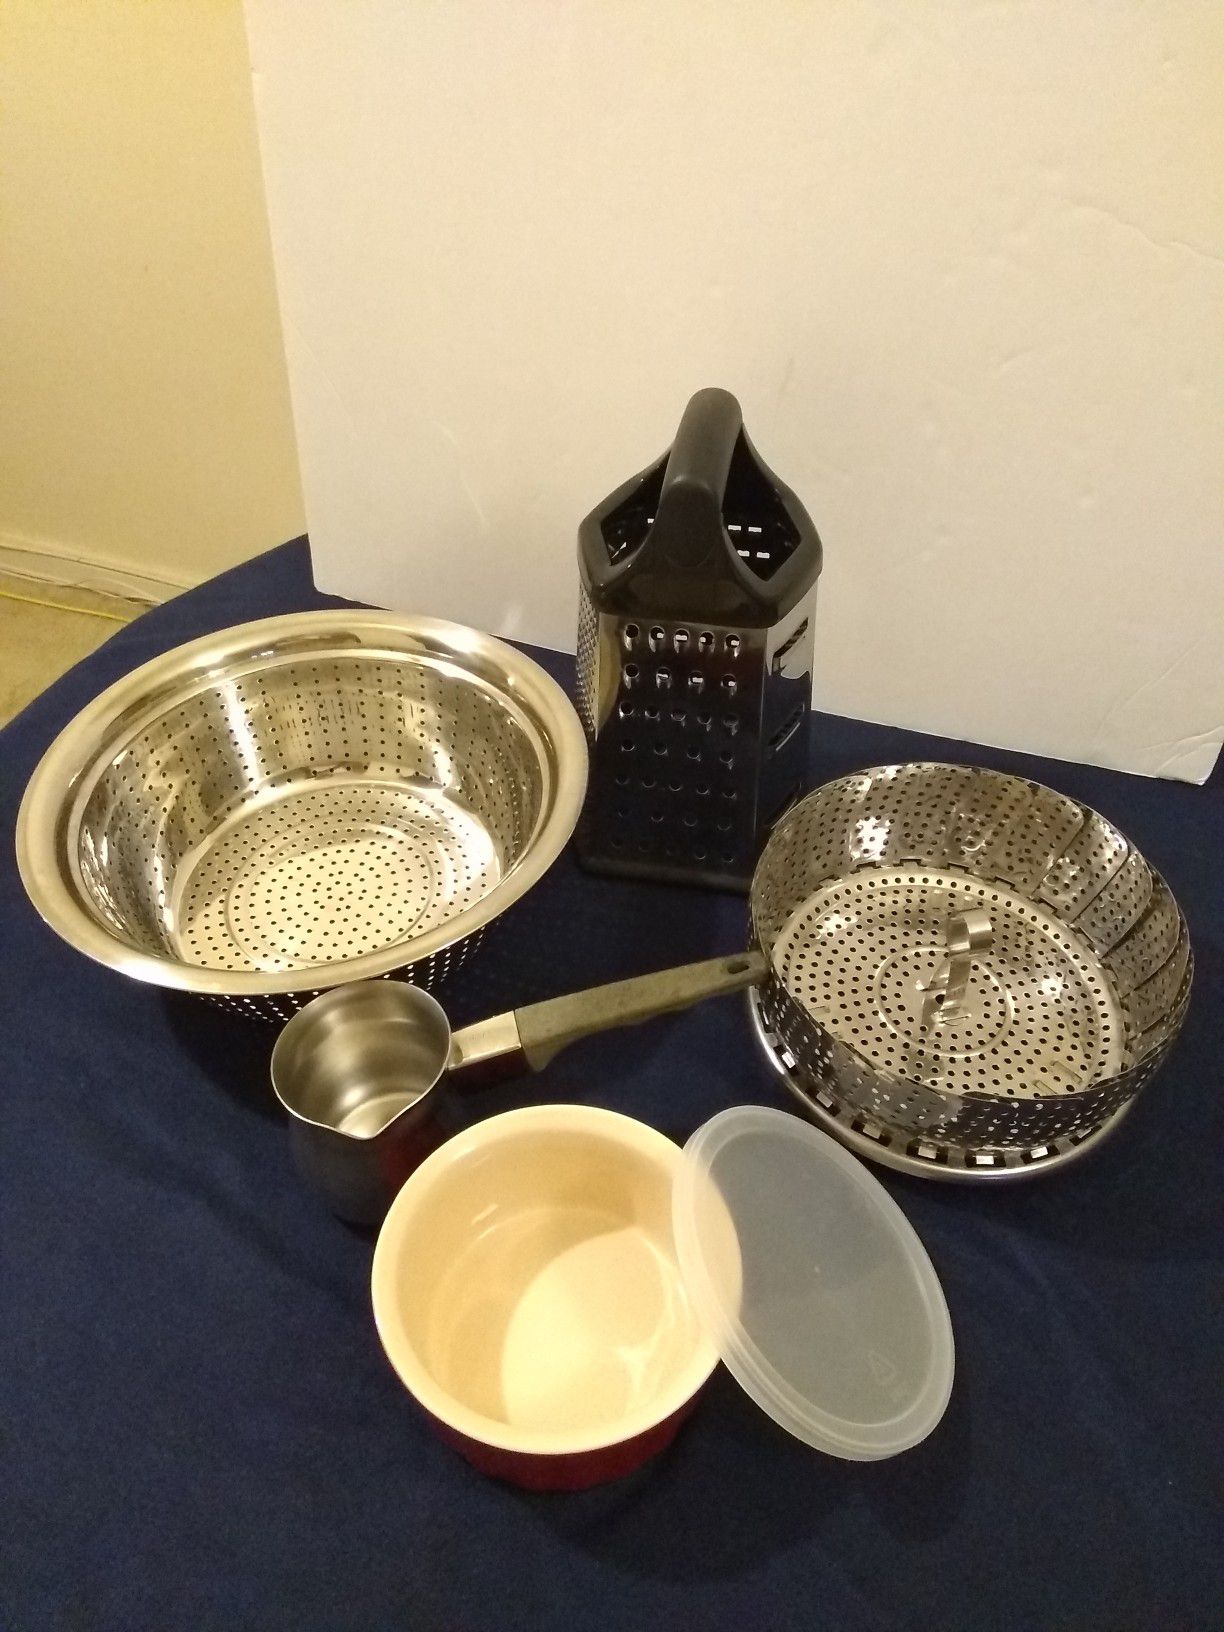 Ramekin with Lid, Strainer, Colander, Grater, Stainless Steel Turkish Coffee Pot, Bread Paddle